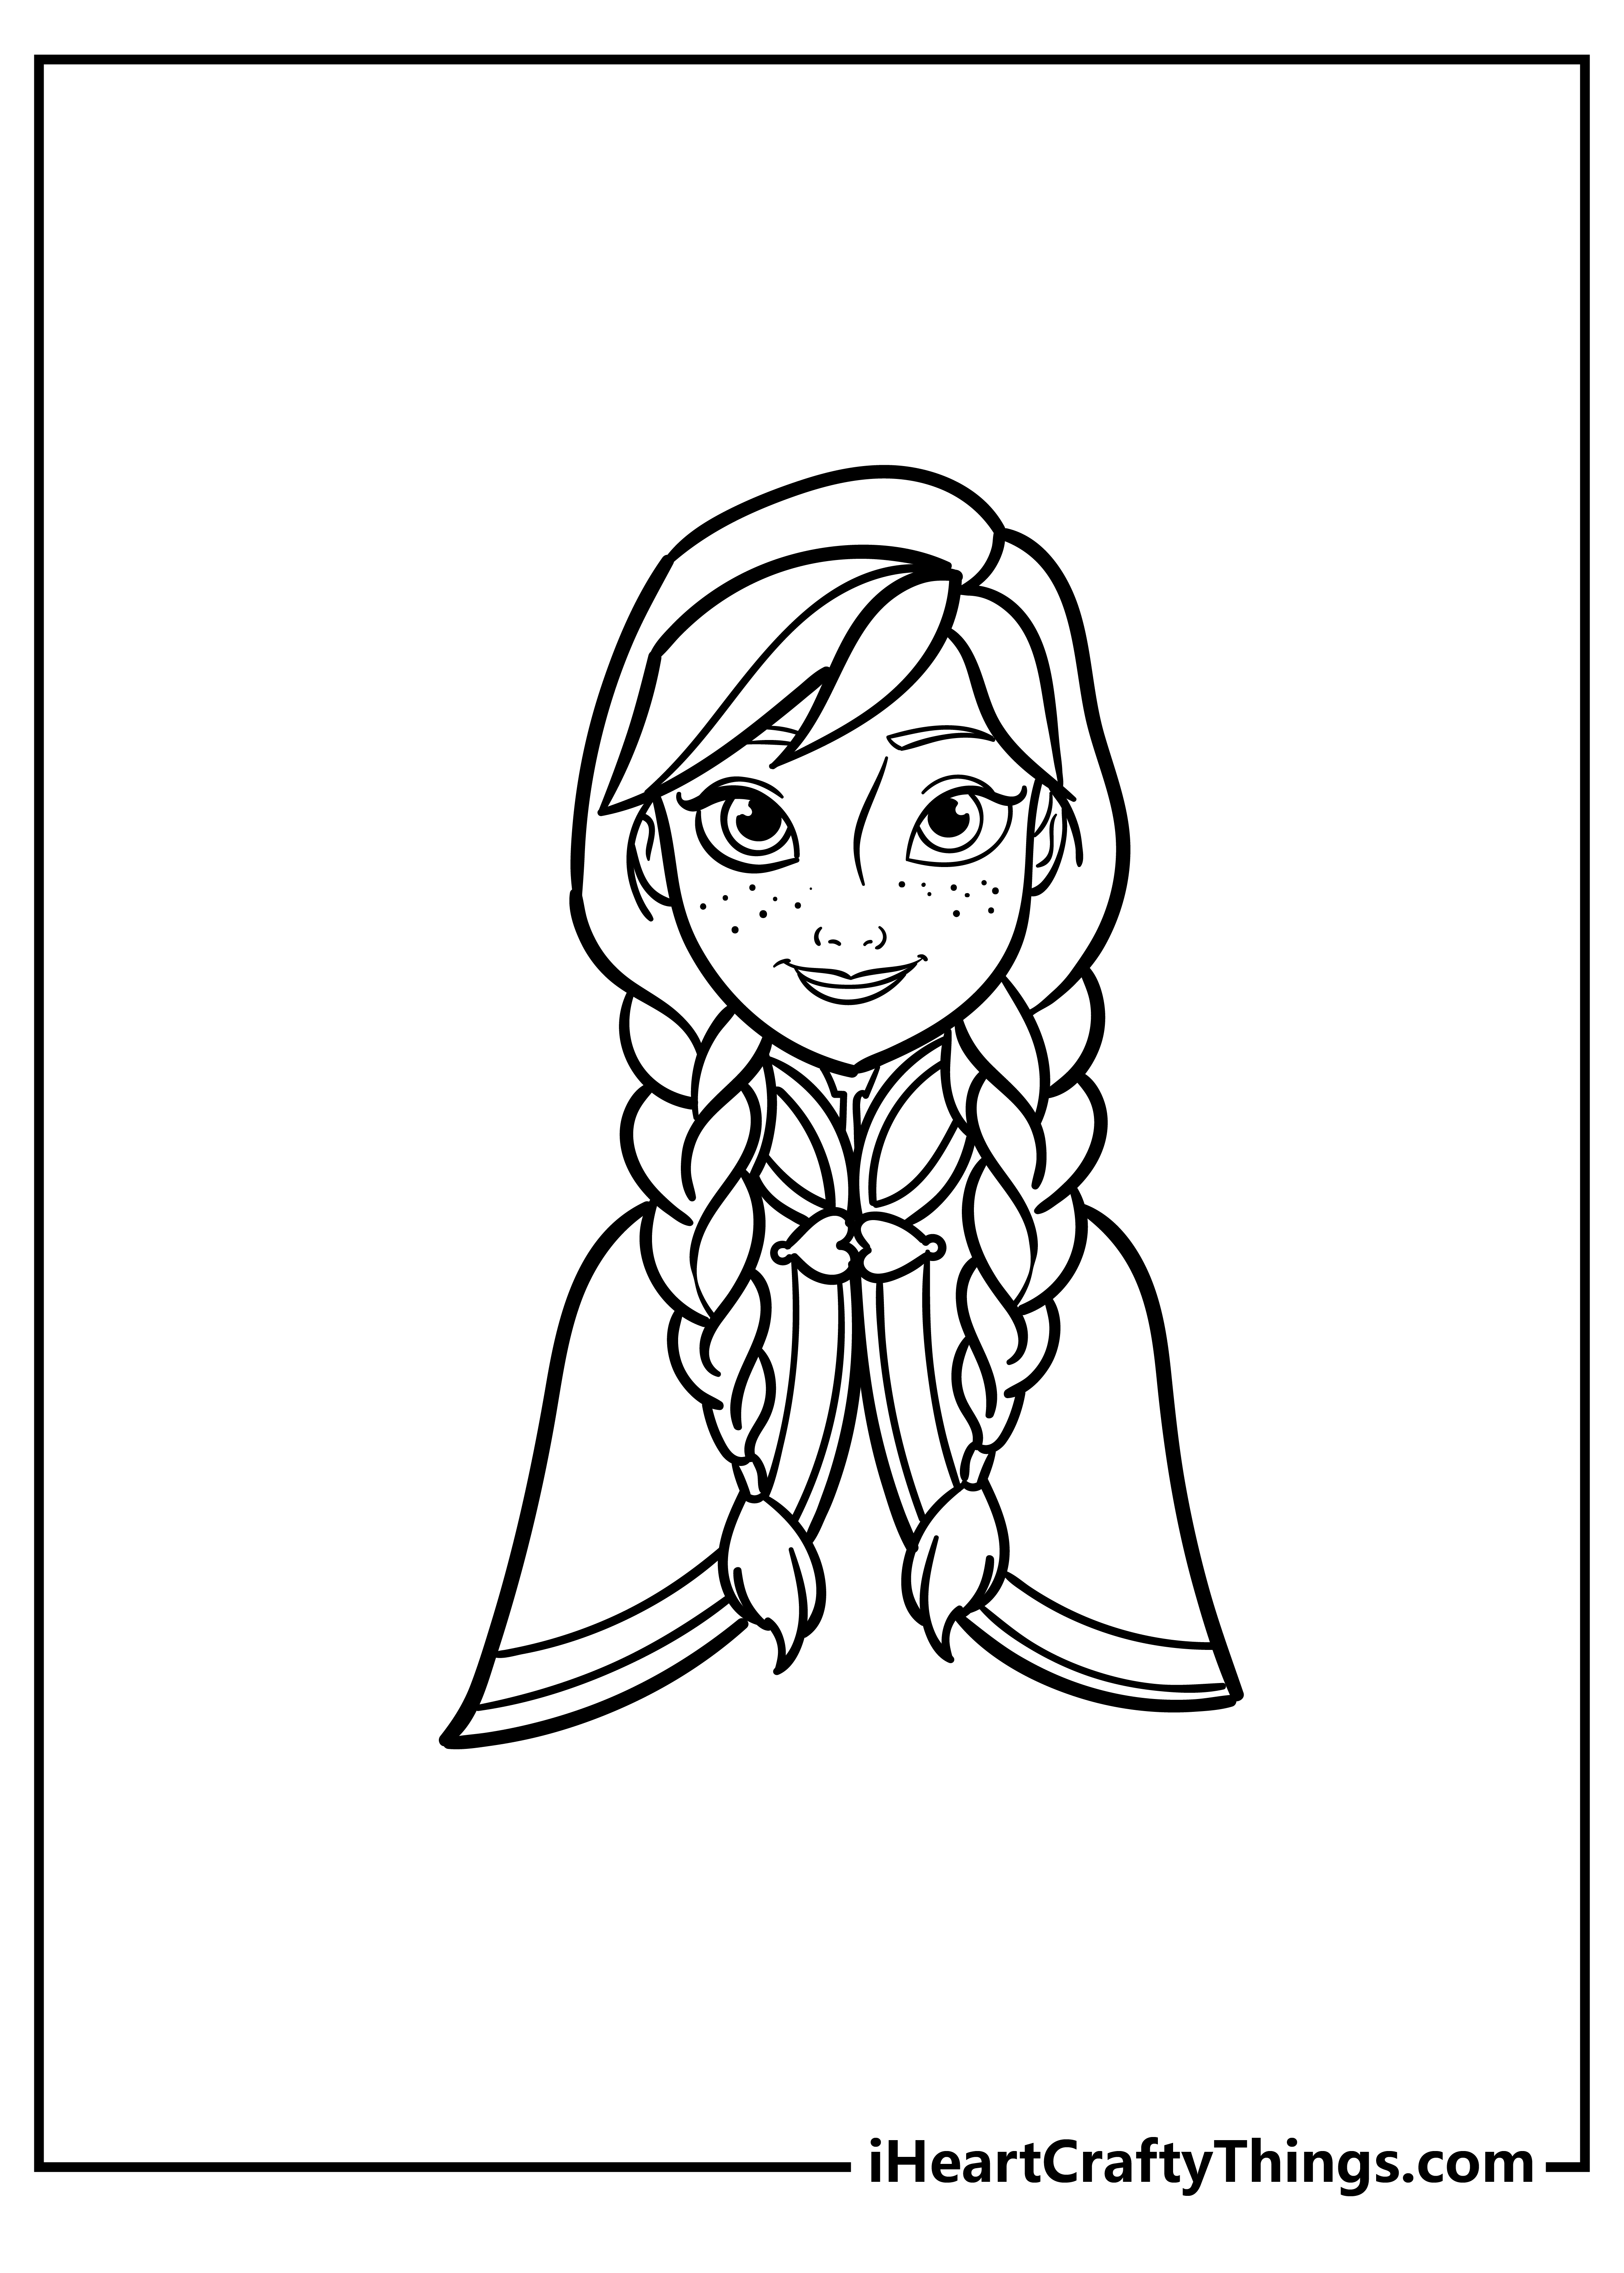 Anna Coloring Pages for preschoolers free printable